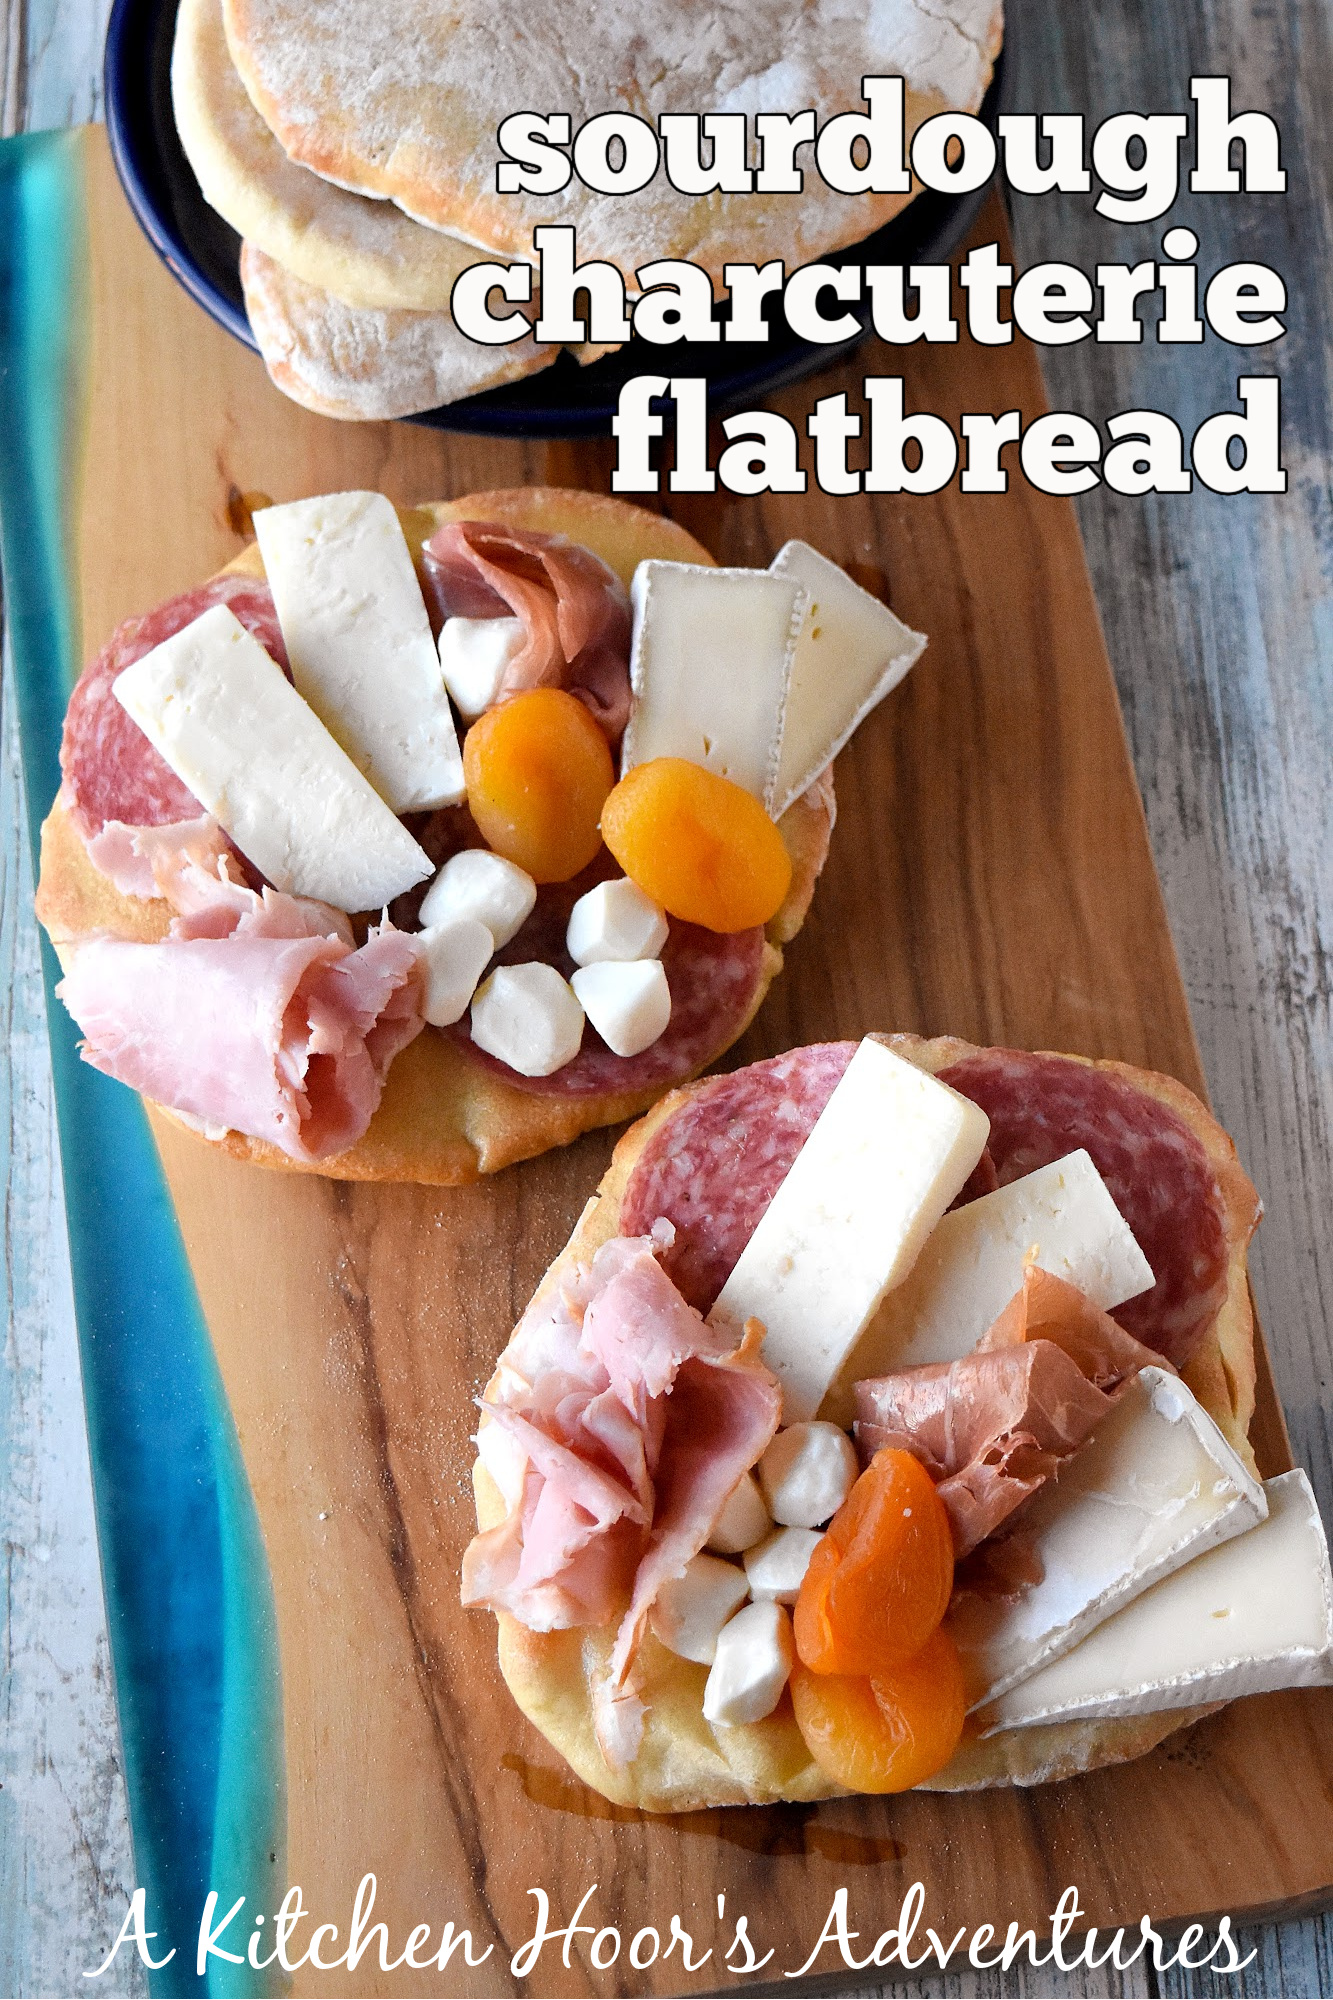 Sourdough Charcuterie Flatbread is the Ultimate Game Day Snack